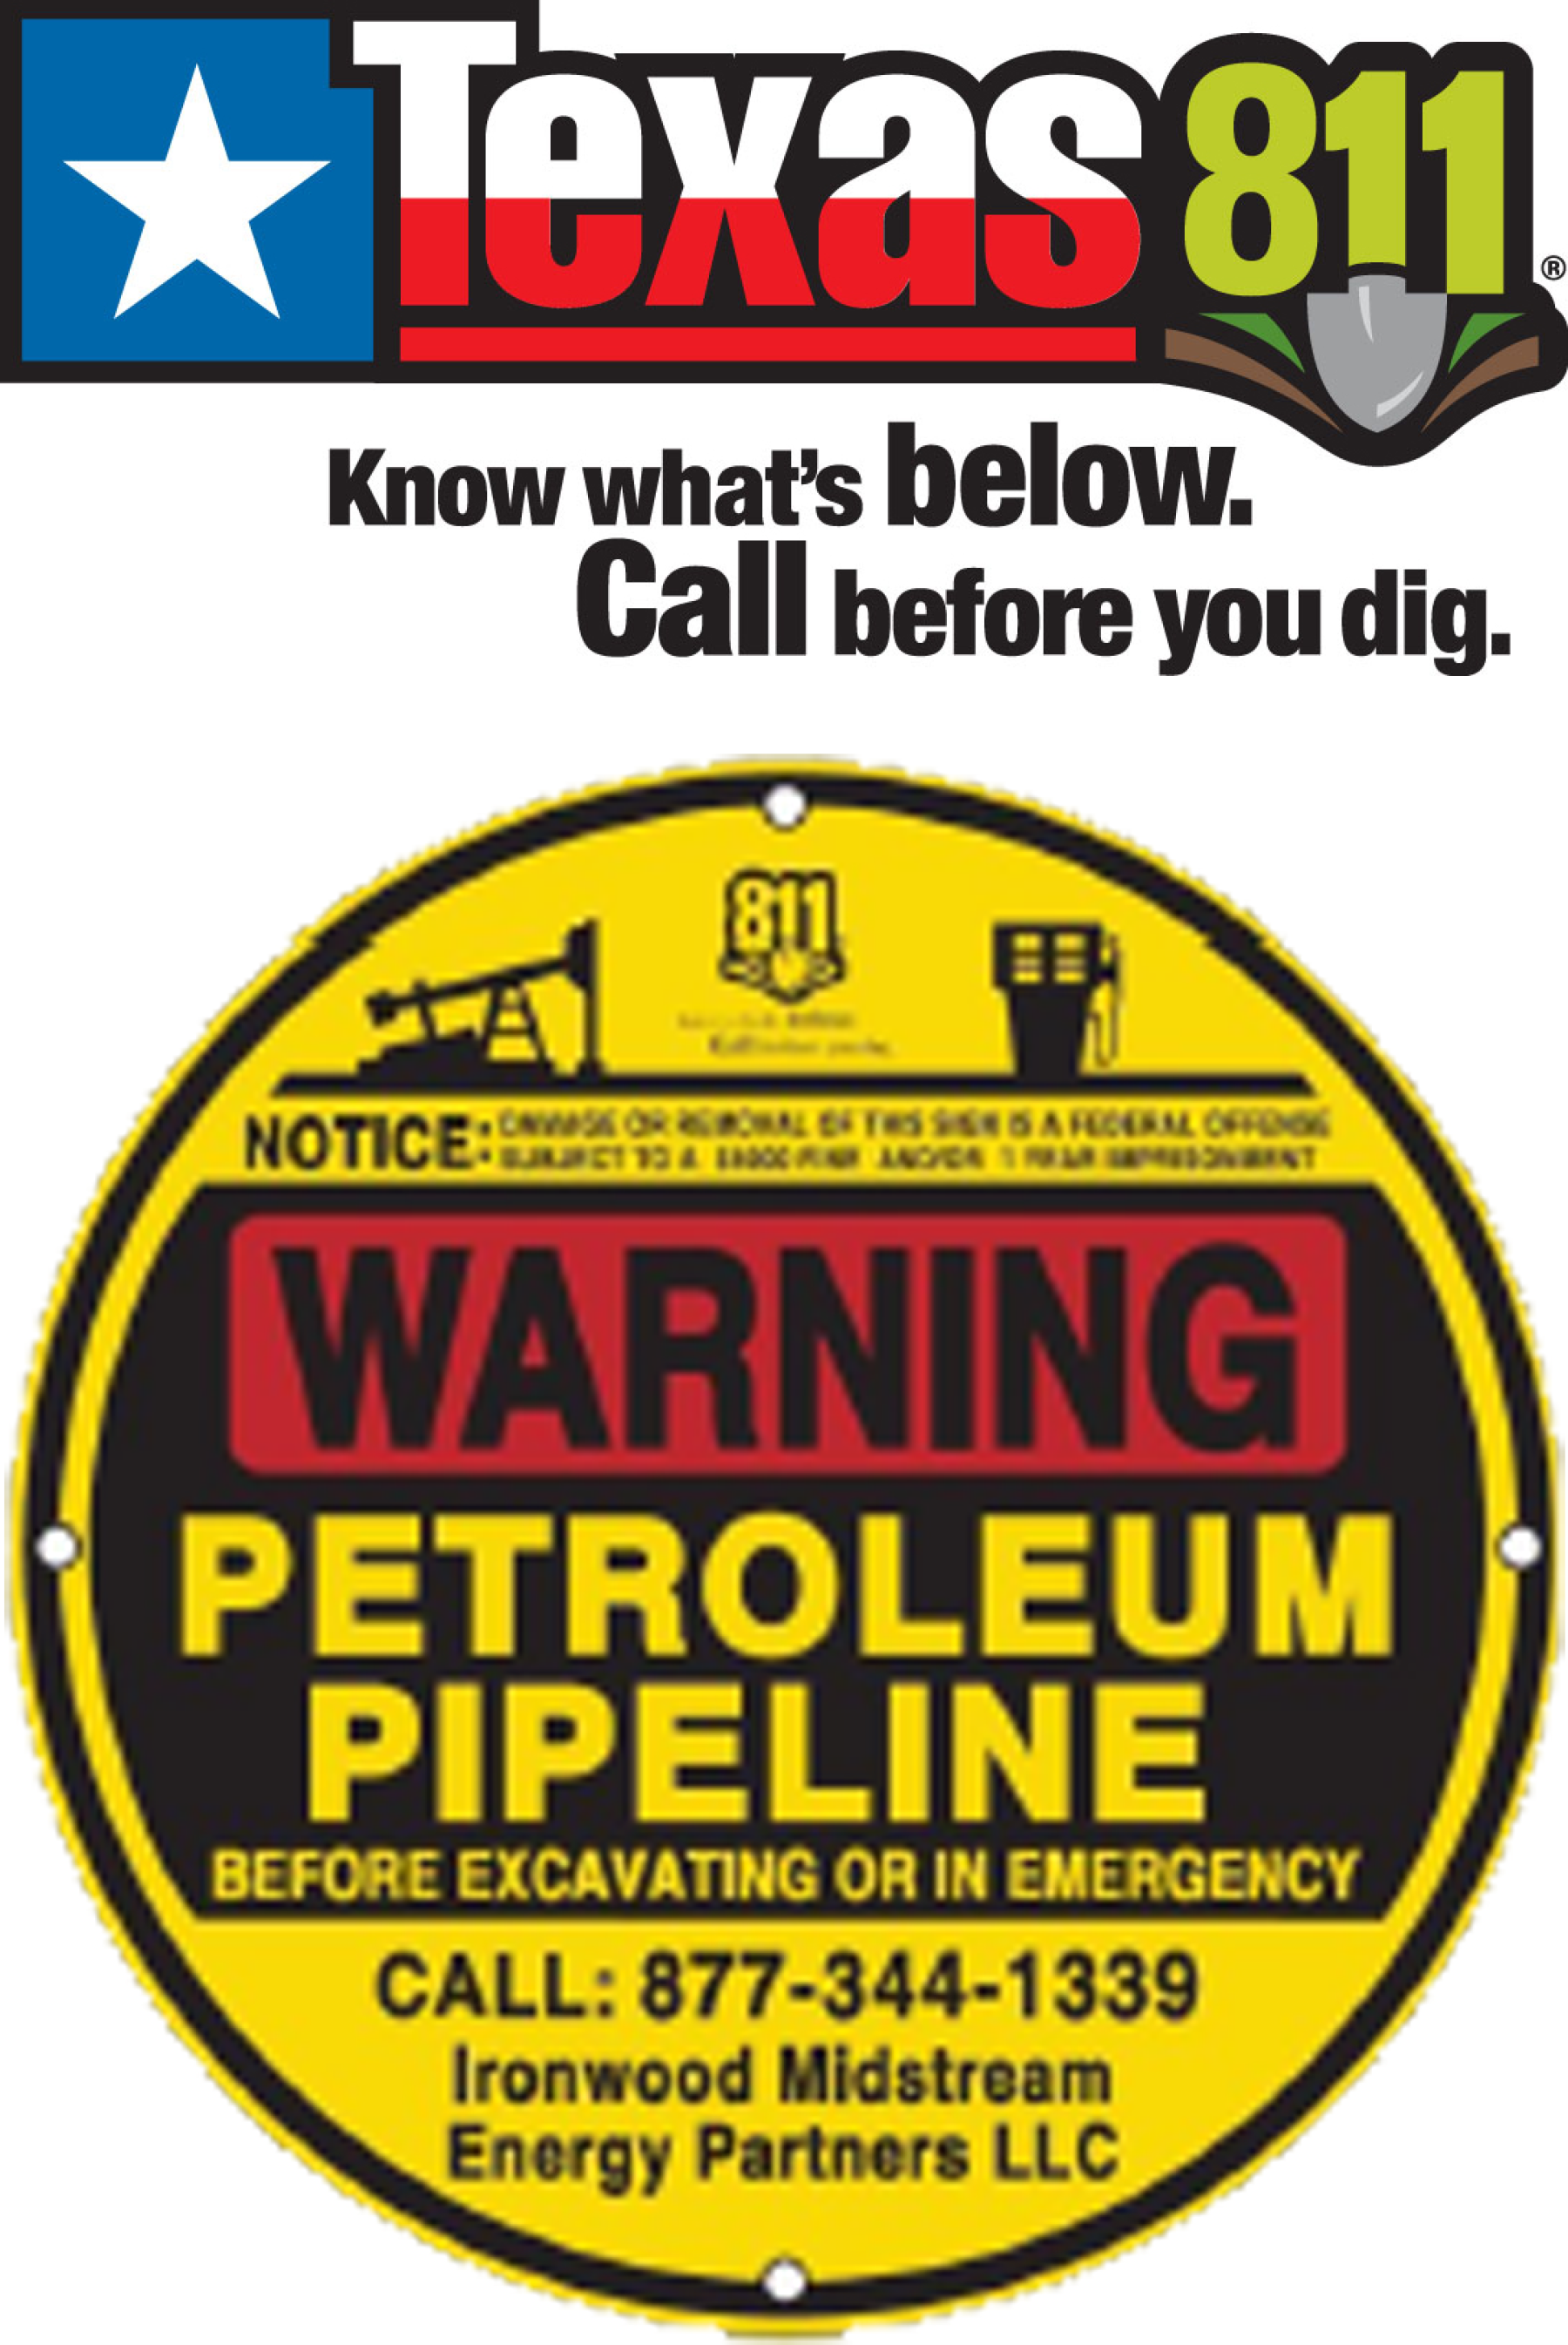 Texas 811 and pipeline warning badge